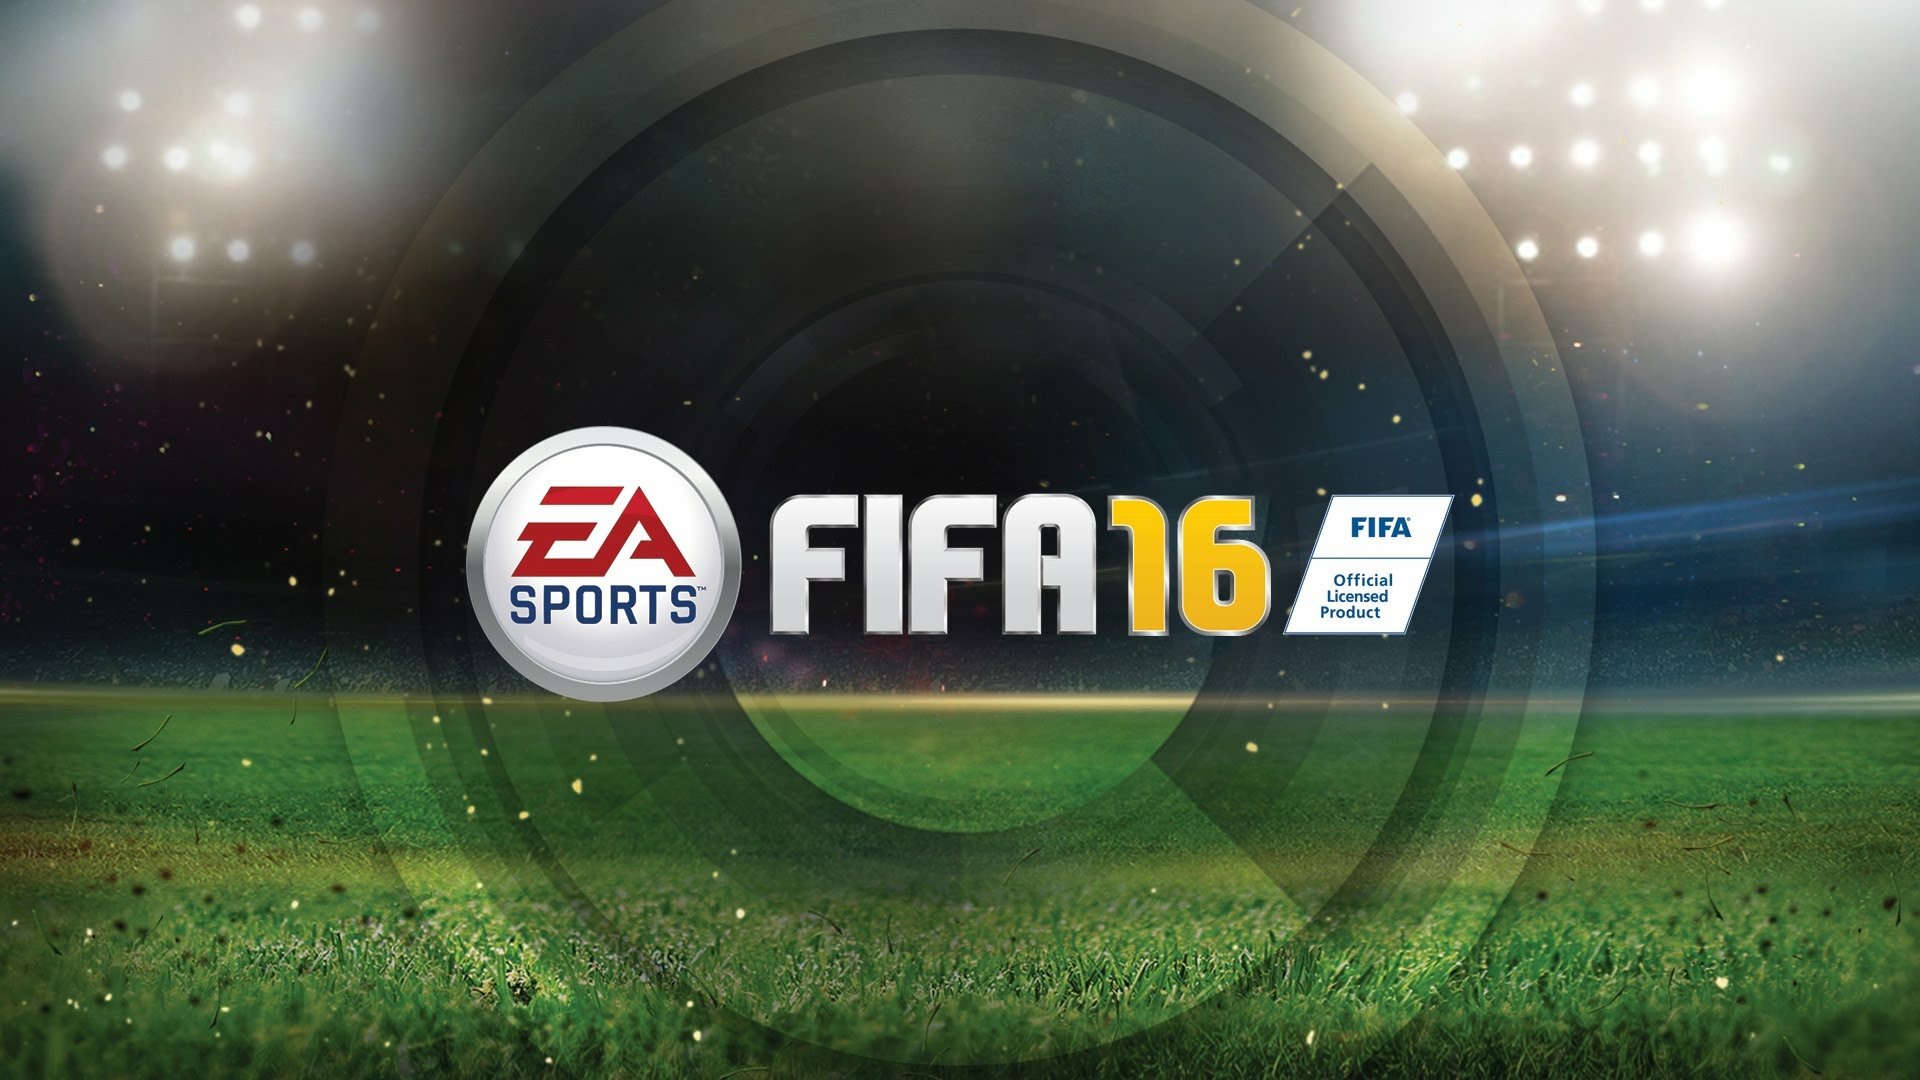 fifa 16 wallpapers